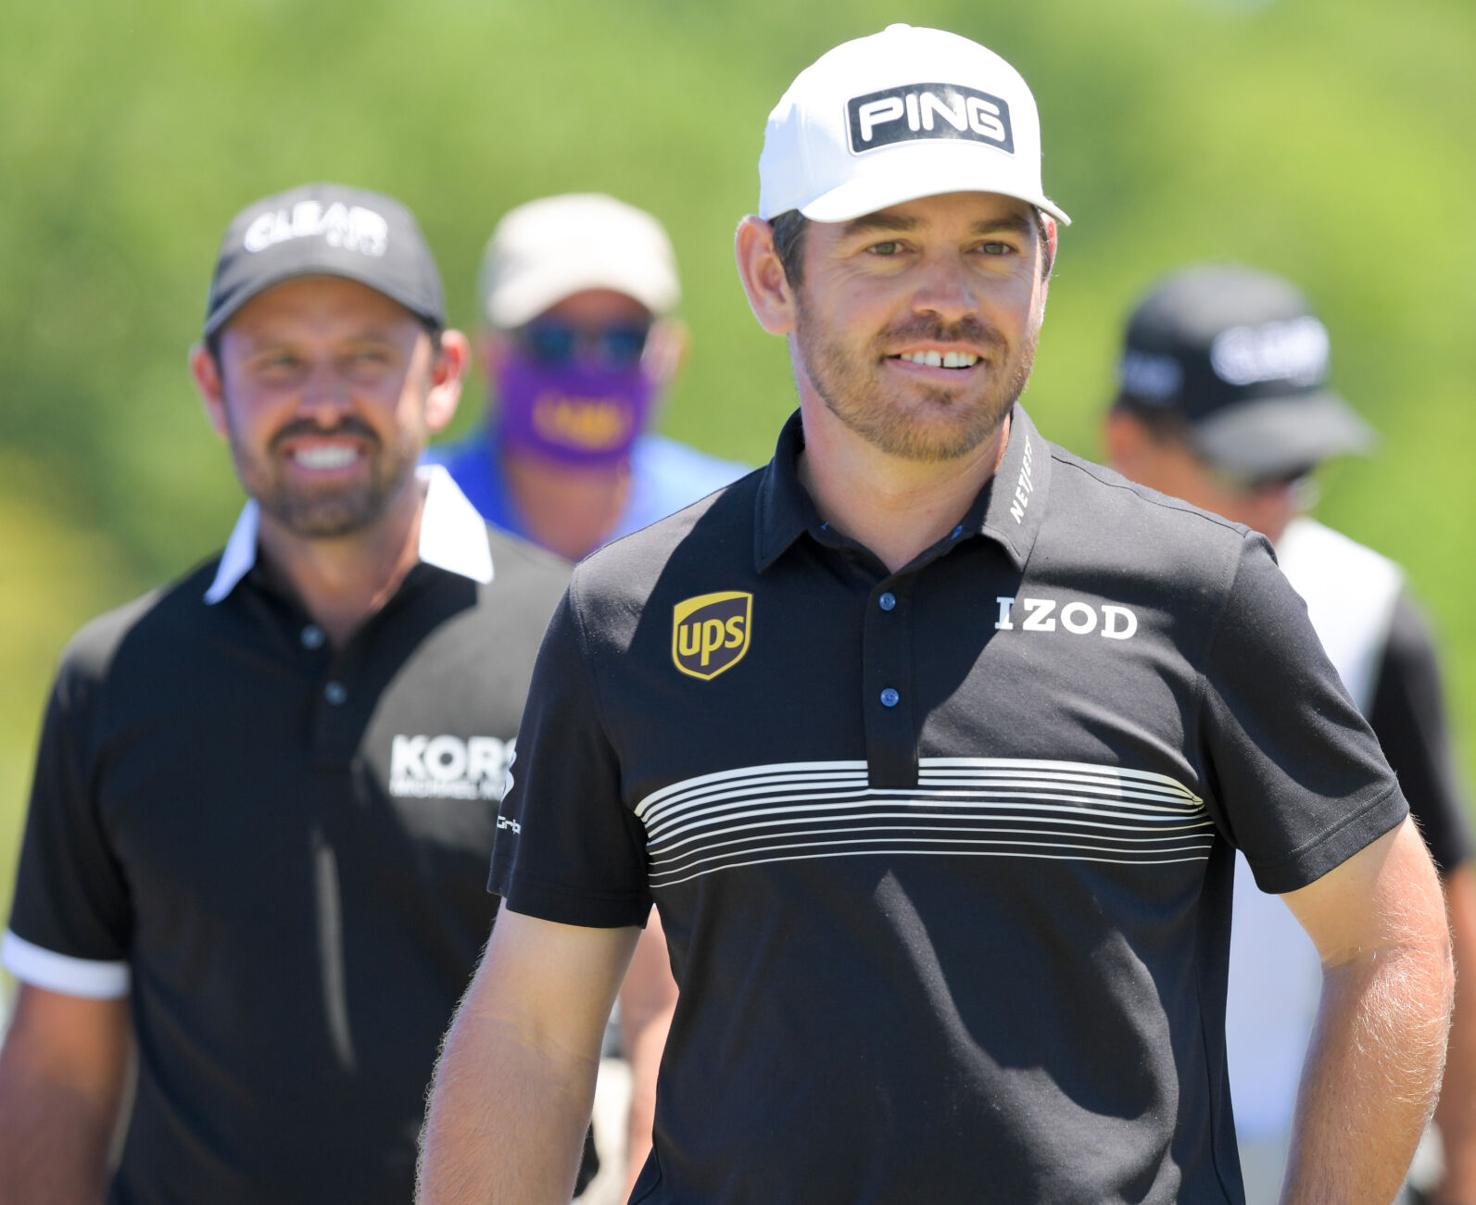 Louis Oosthuizen and Charl Schwartzel return to Zurich Classic after